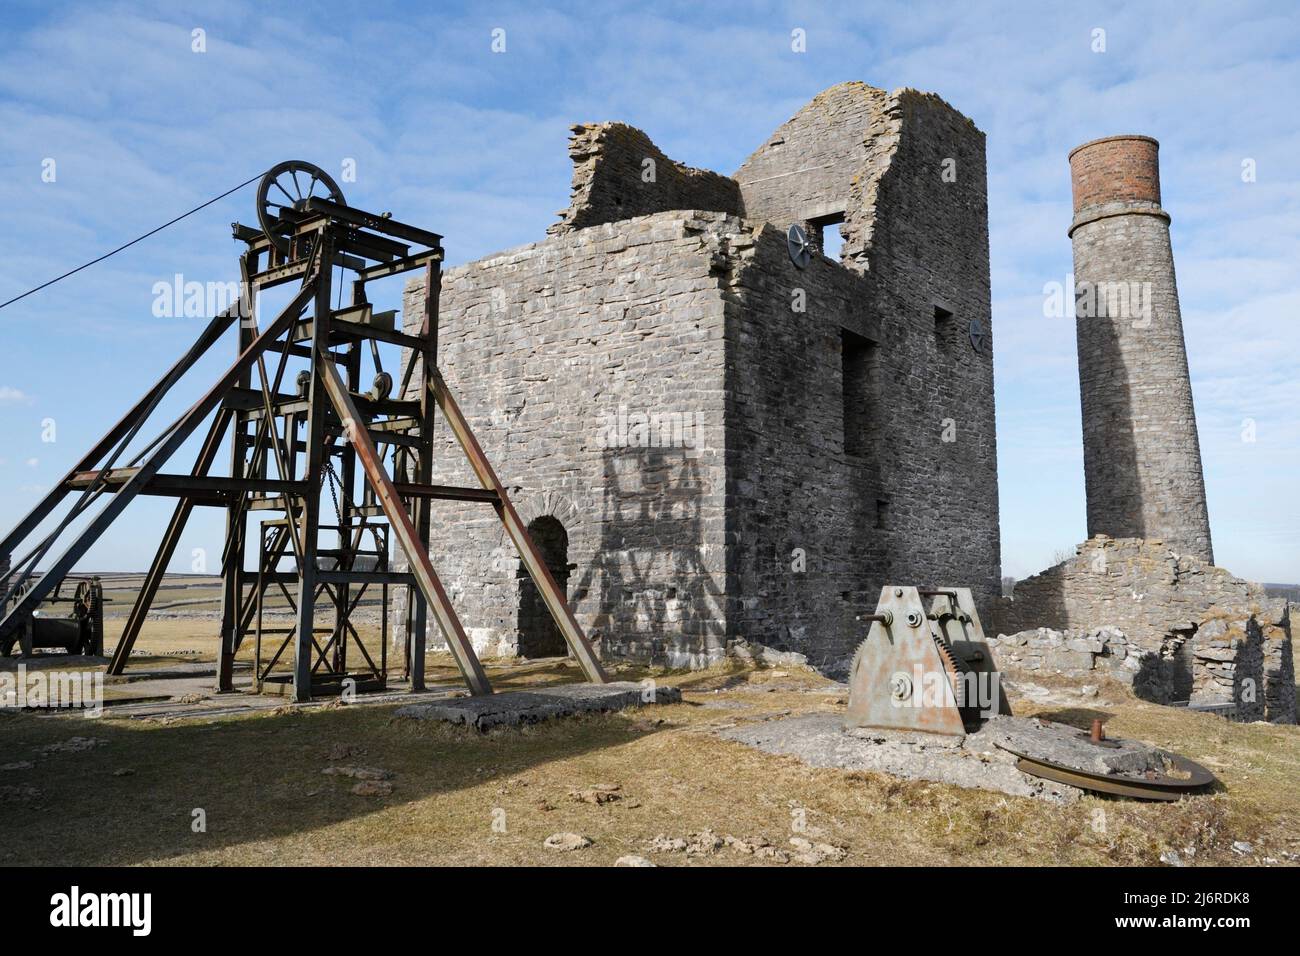 Magpie lead mine near Sheldon in Derbyshire England, Industrial heritage, lead mining, Peak district national park Stock Photo